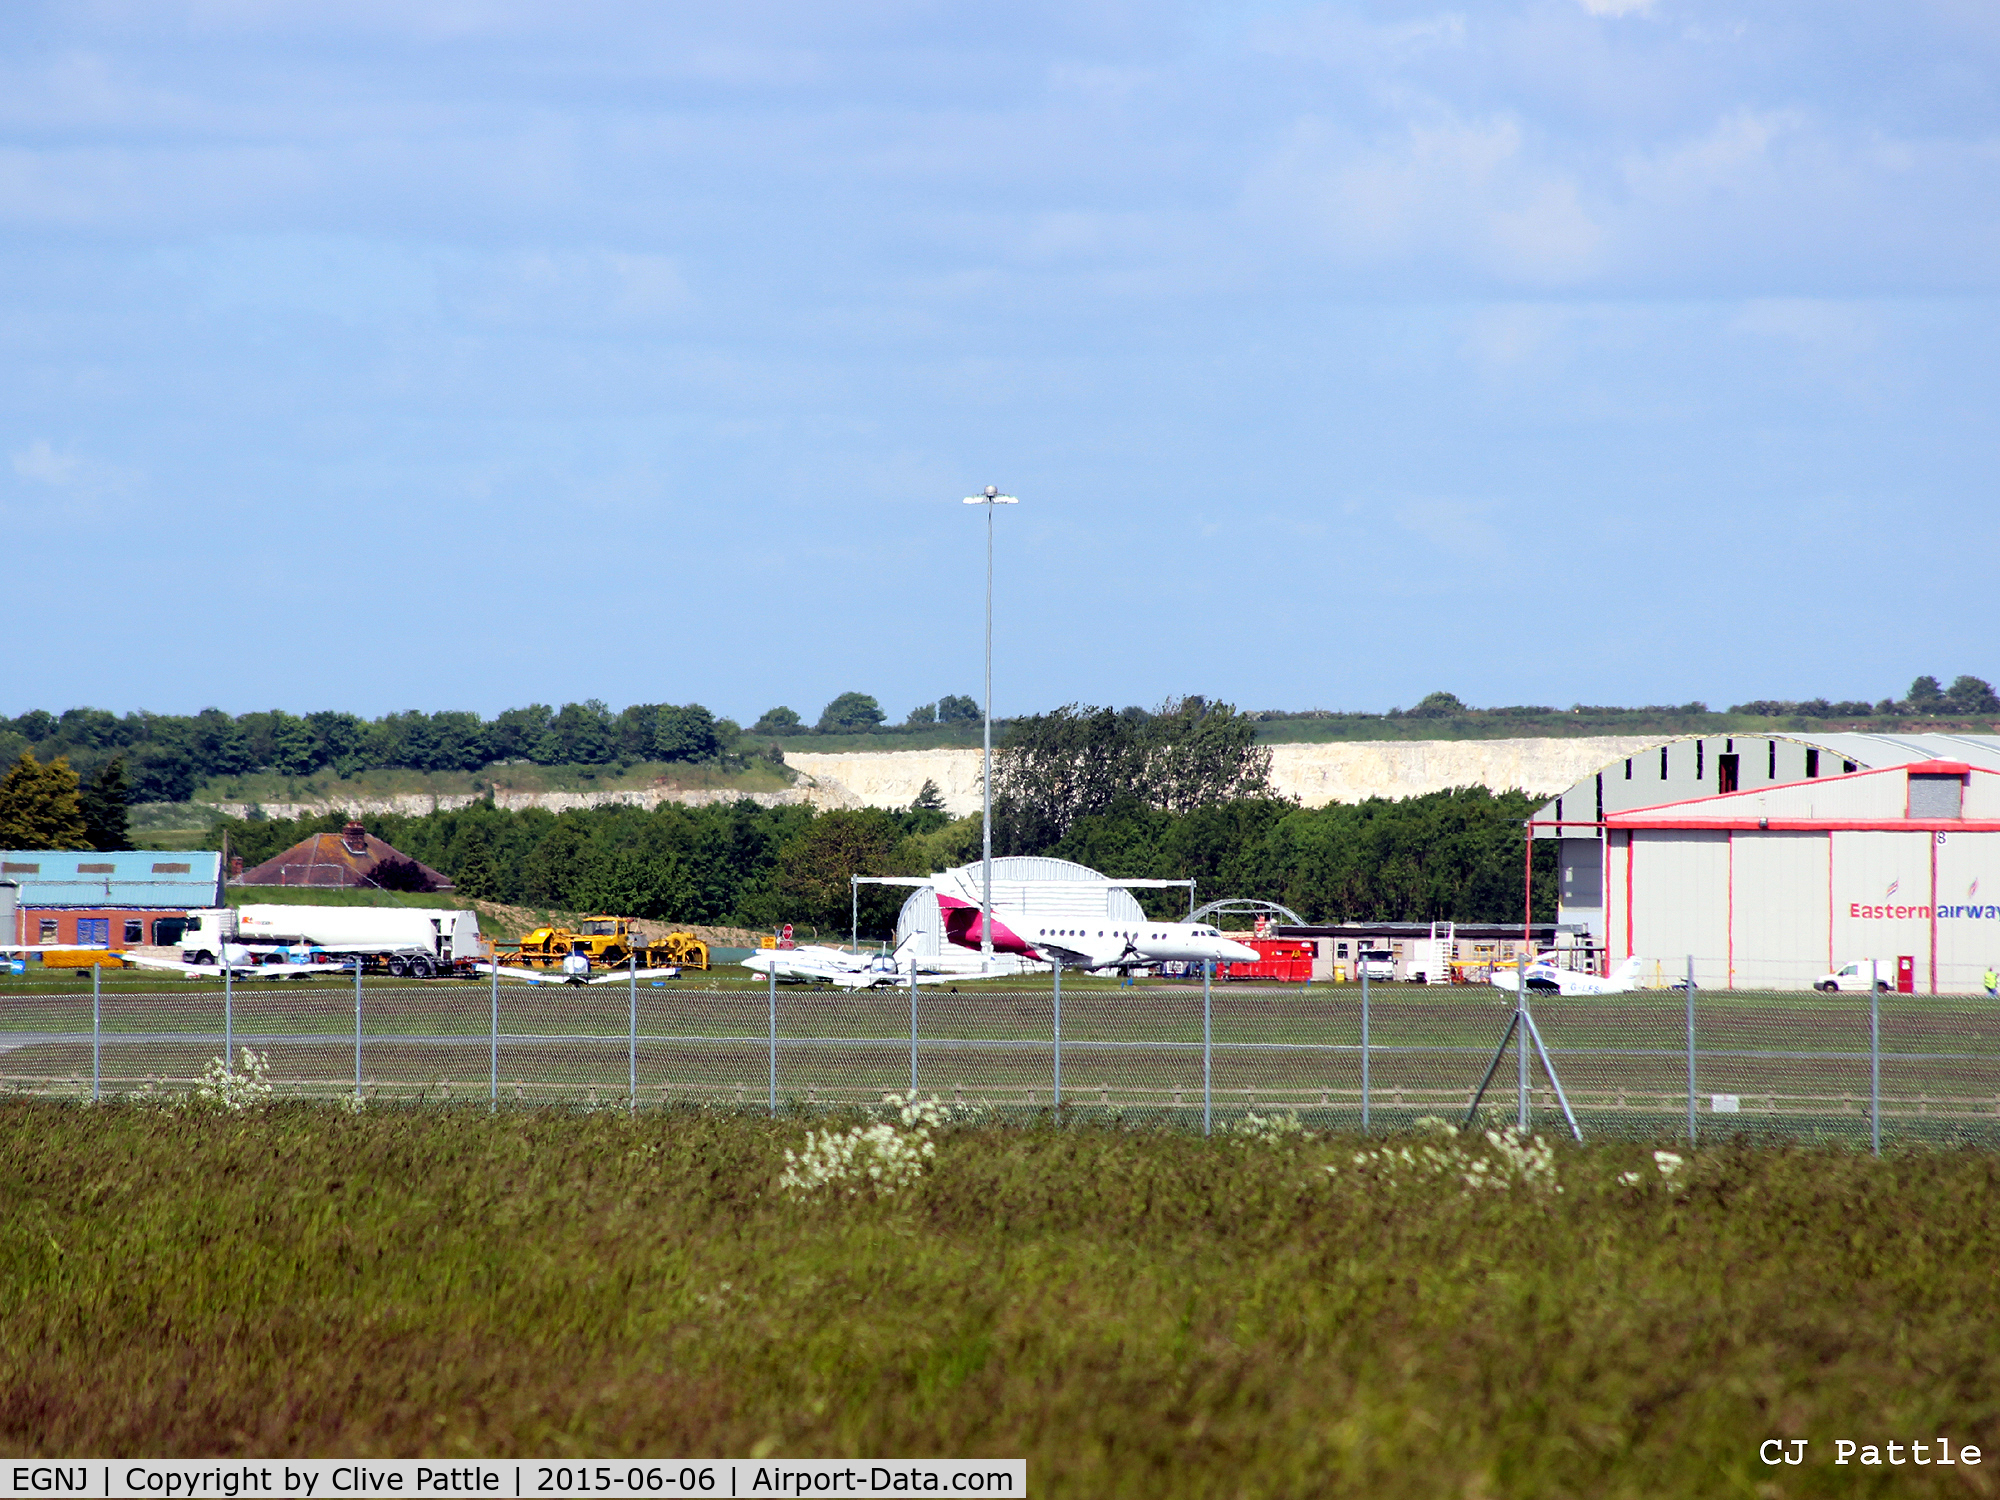 Humberside Airport, Kingston upon Hull, England United Kingdom (EGNJ) - View of the airfield buildings at EGNJ